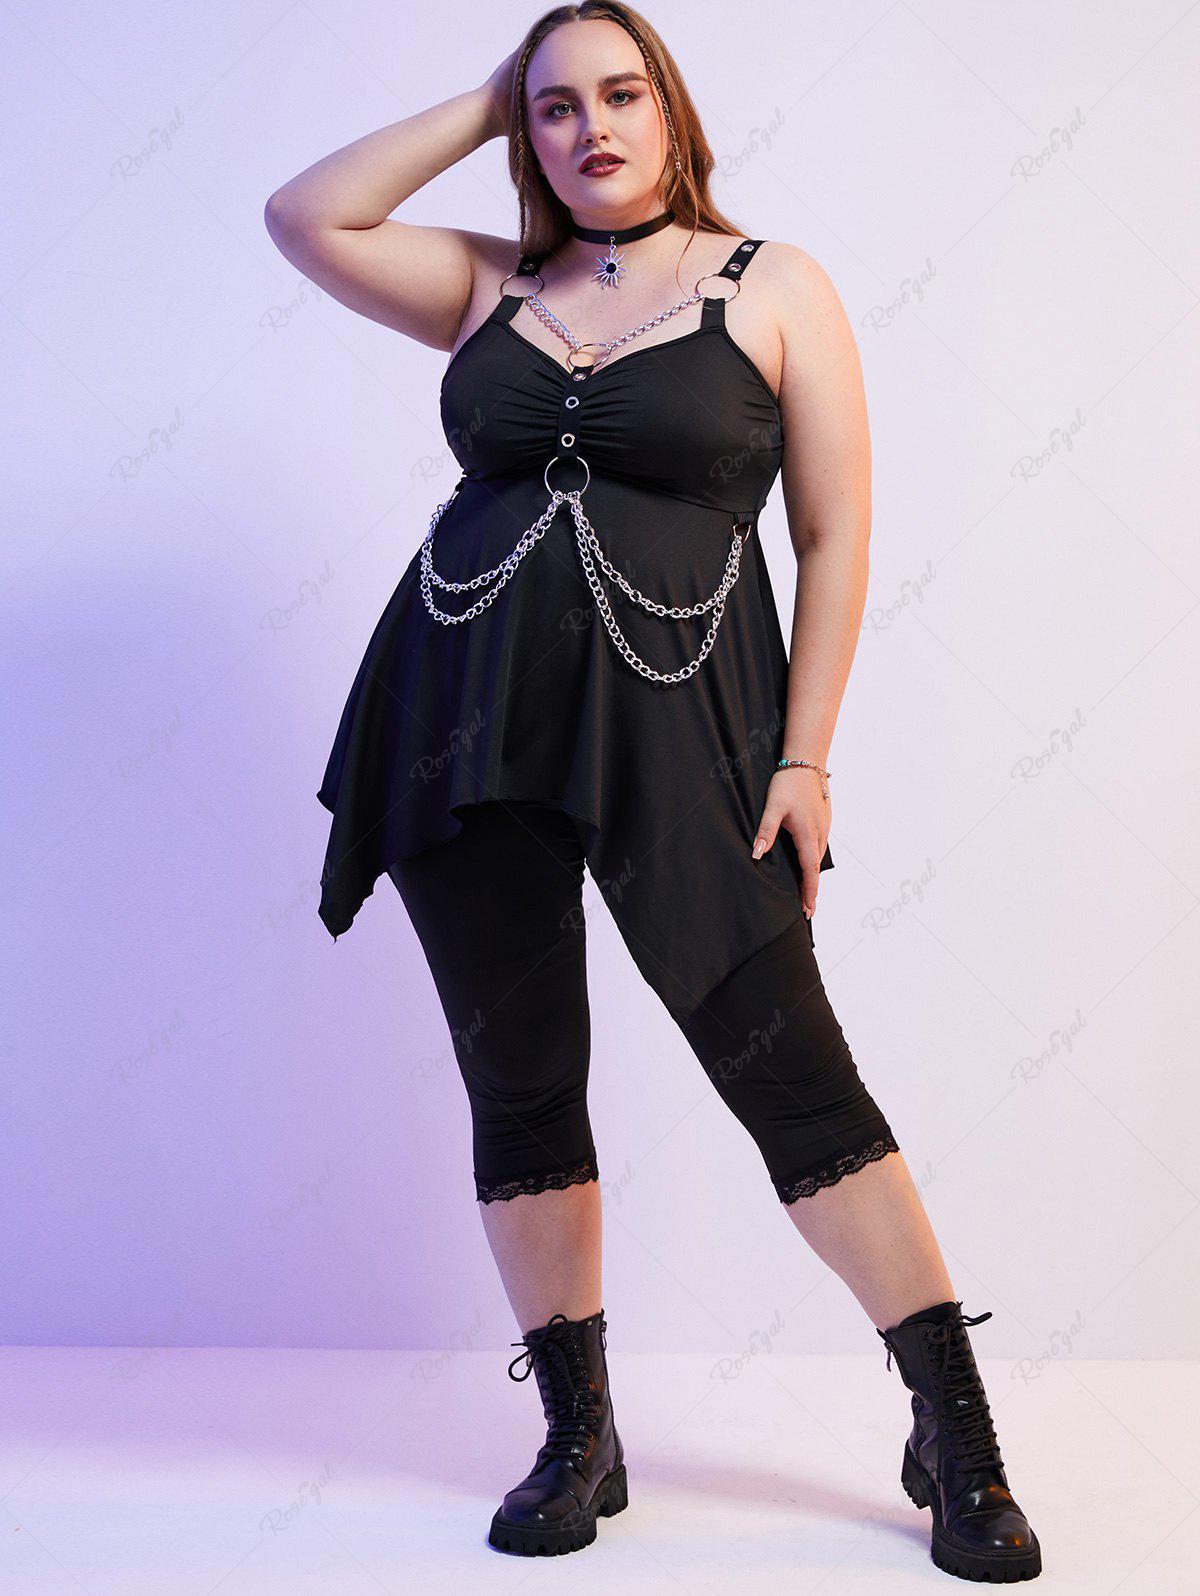 Plus Size Gothic O Ring Chains Handkerchief Tank Top [39% OFF